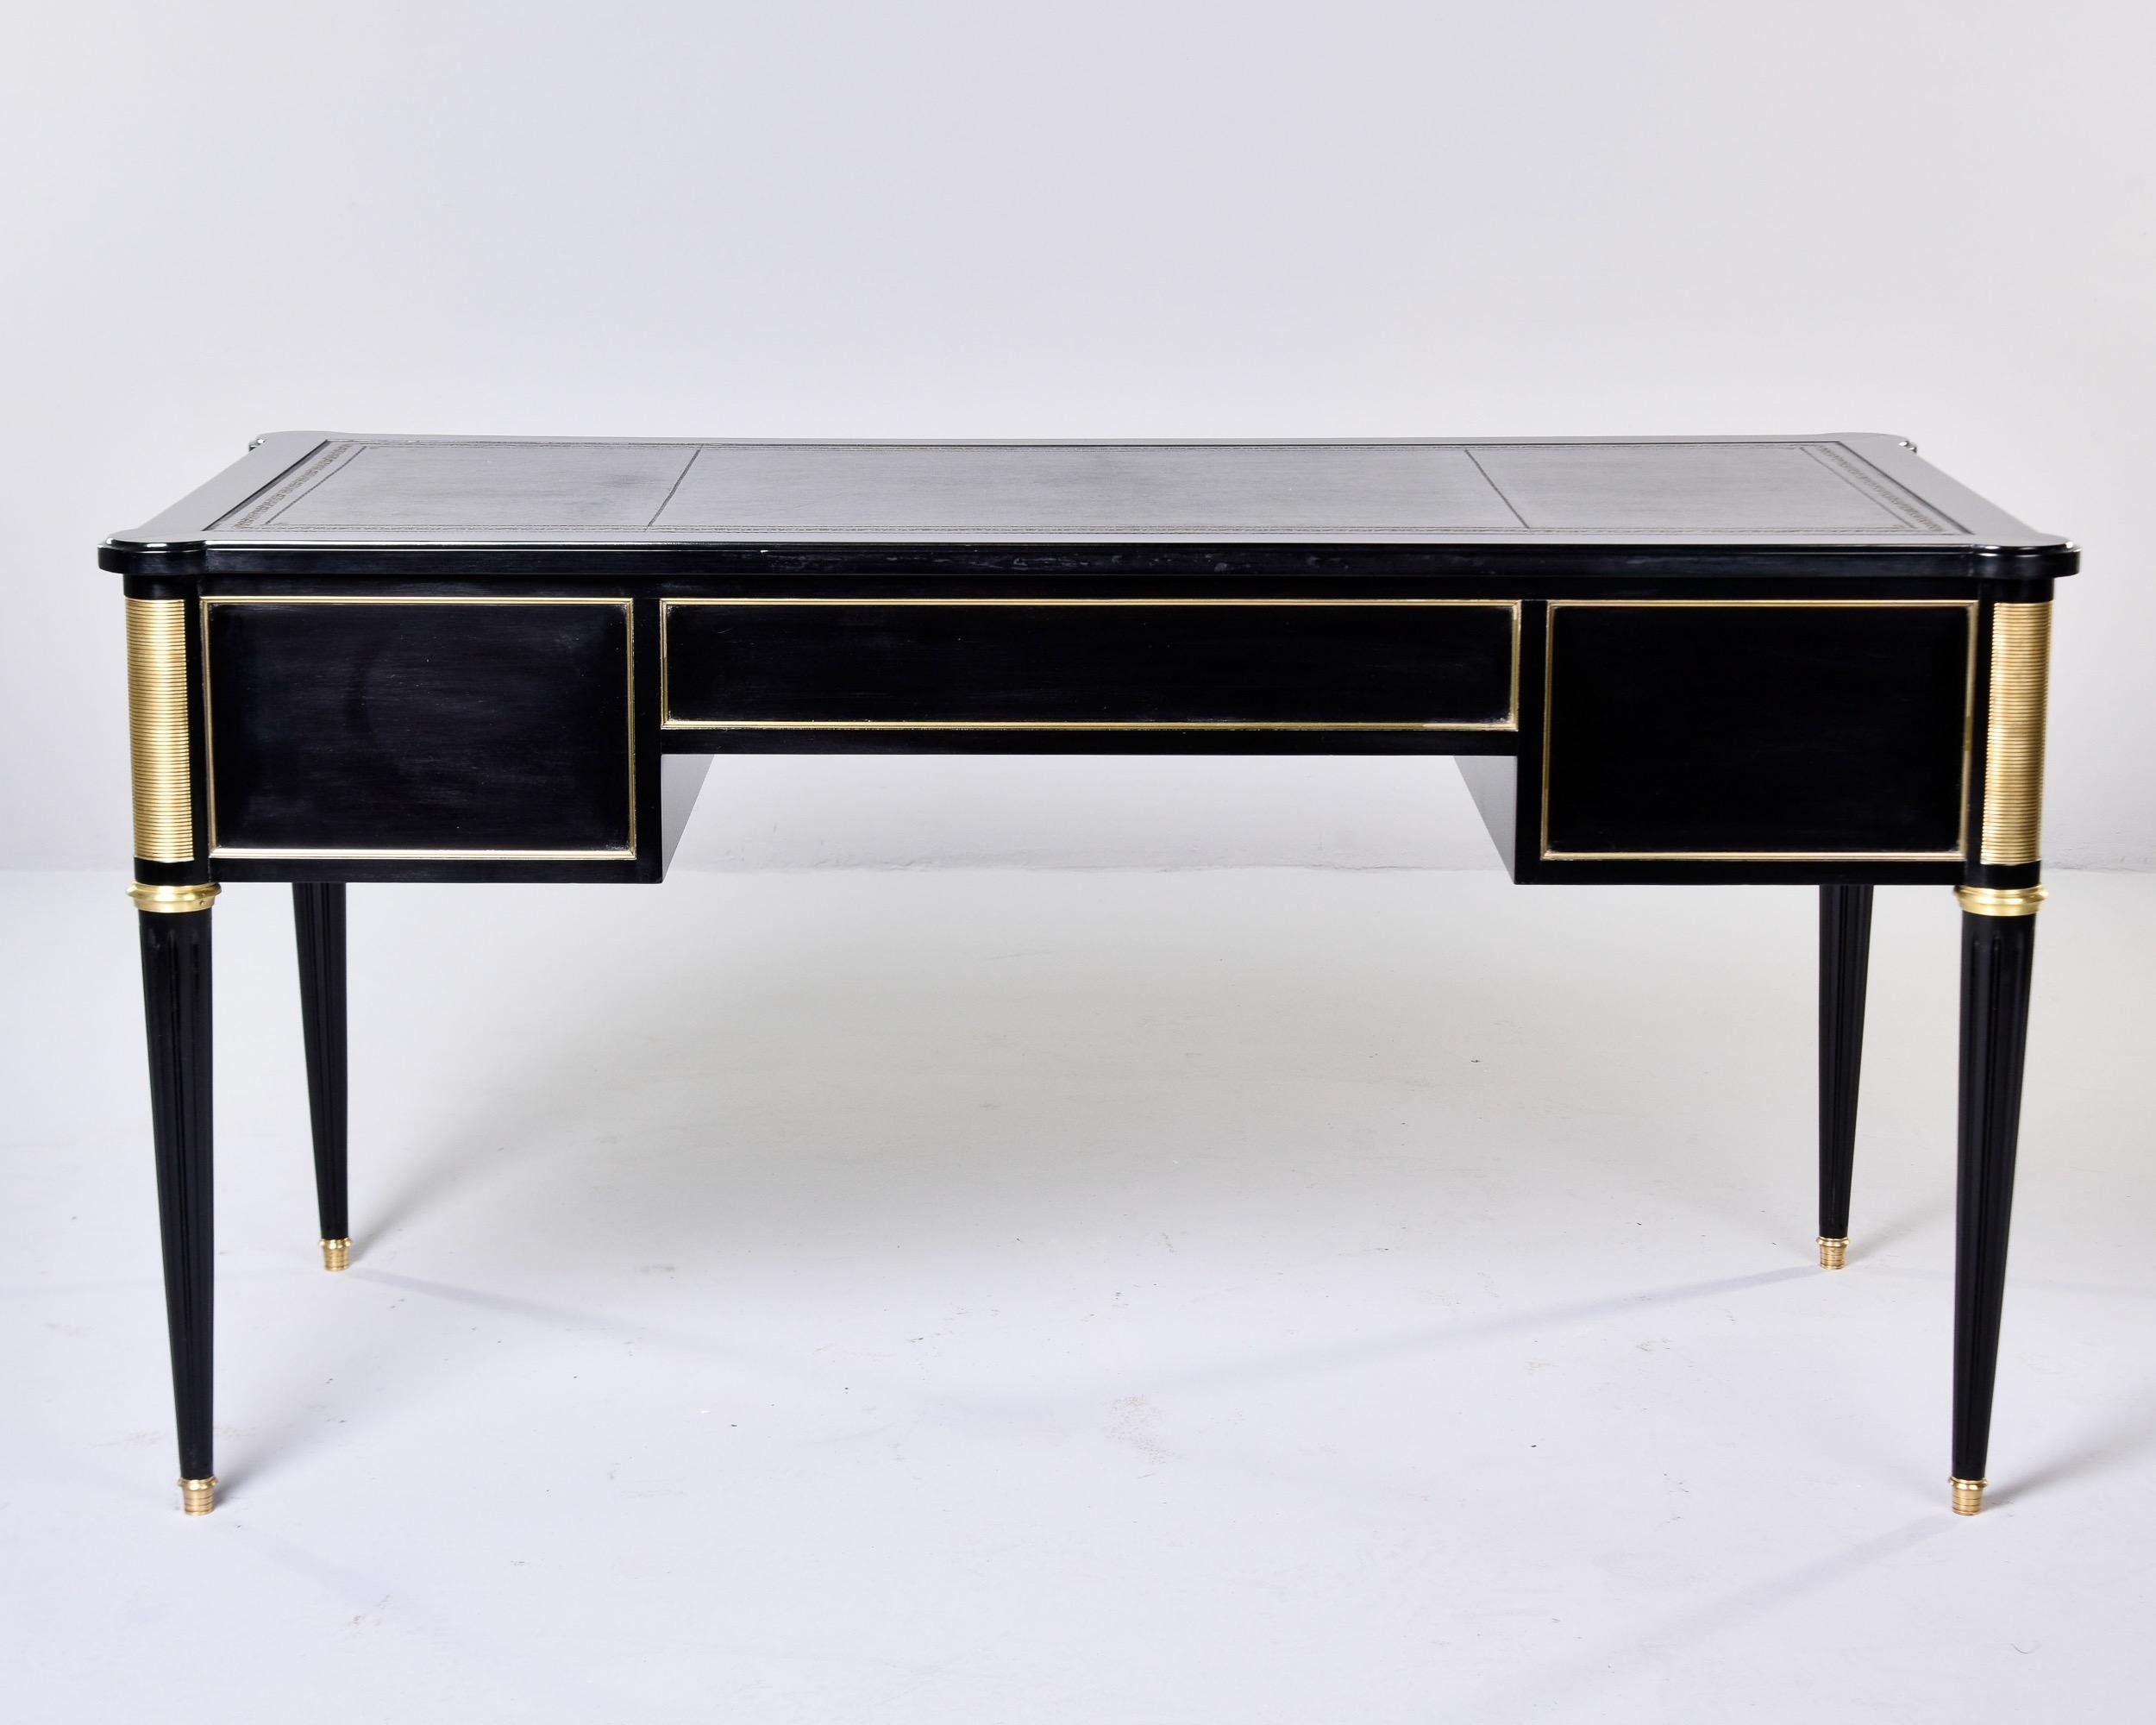 19th C Louis XVI Style Ebonised Desk with Brass Mounts and New Leather Top  For Sale 5